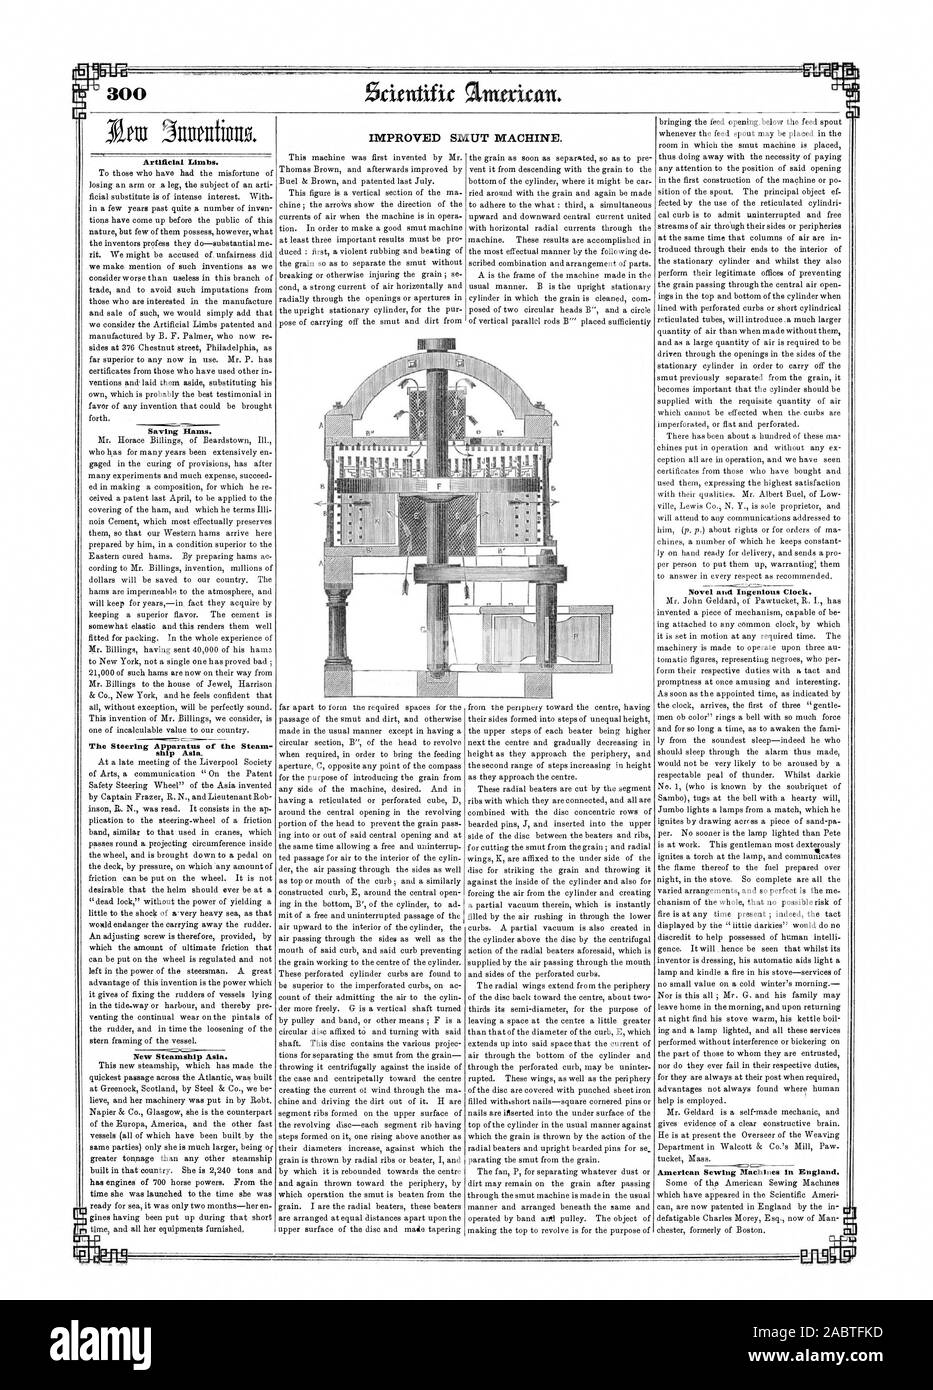 300 IMPROVED SMUT MACHINE. Artificial Limbs. Saving Hams. The Steering Apparatus of the Steam ship Asia. New Steamship Asia. Novel and Ingenious Clock. American Sewing Machines in England., scientific american, 1850-06-08 Stock Photo